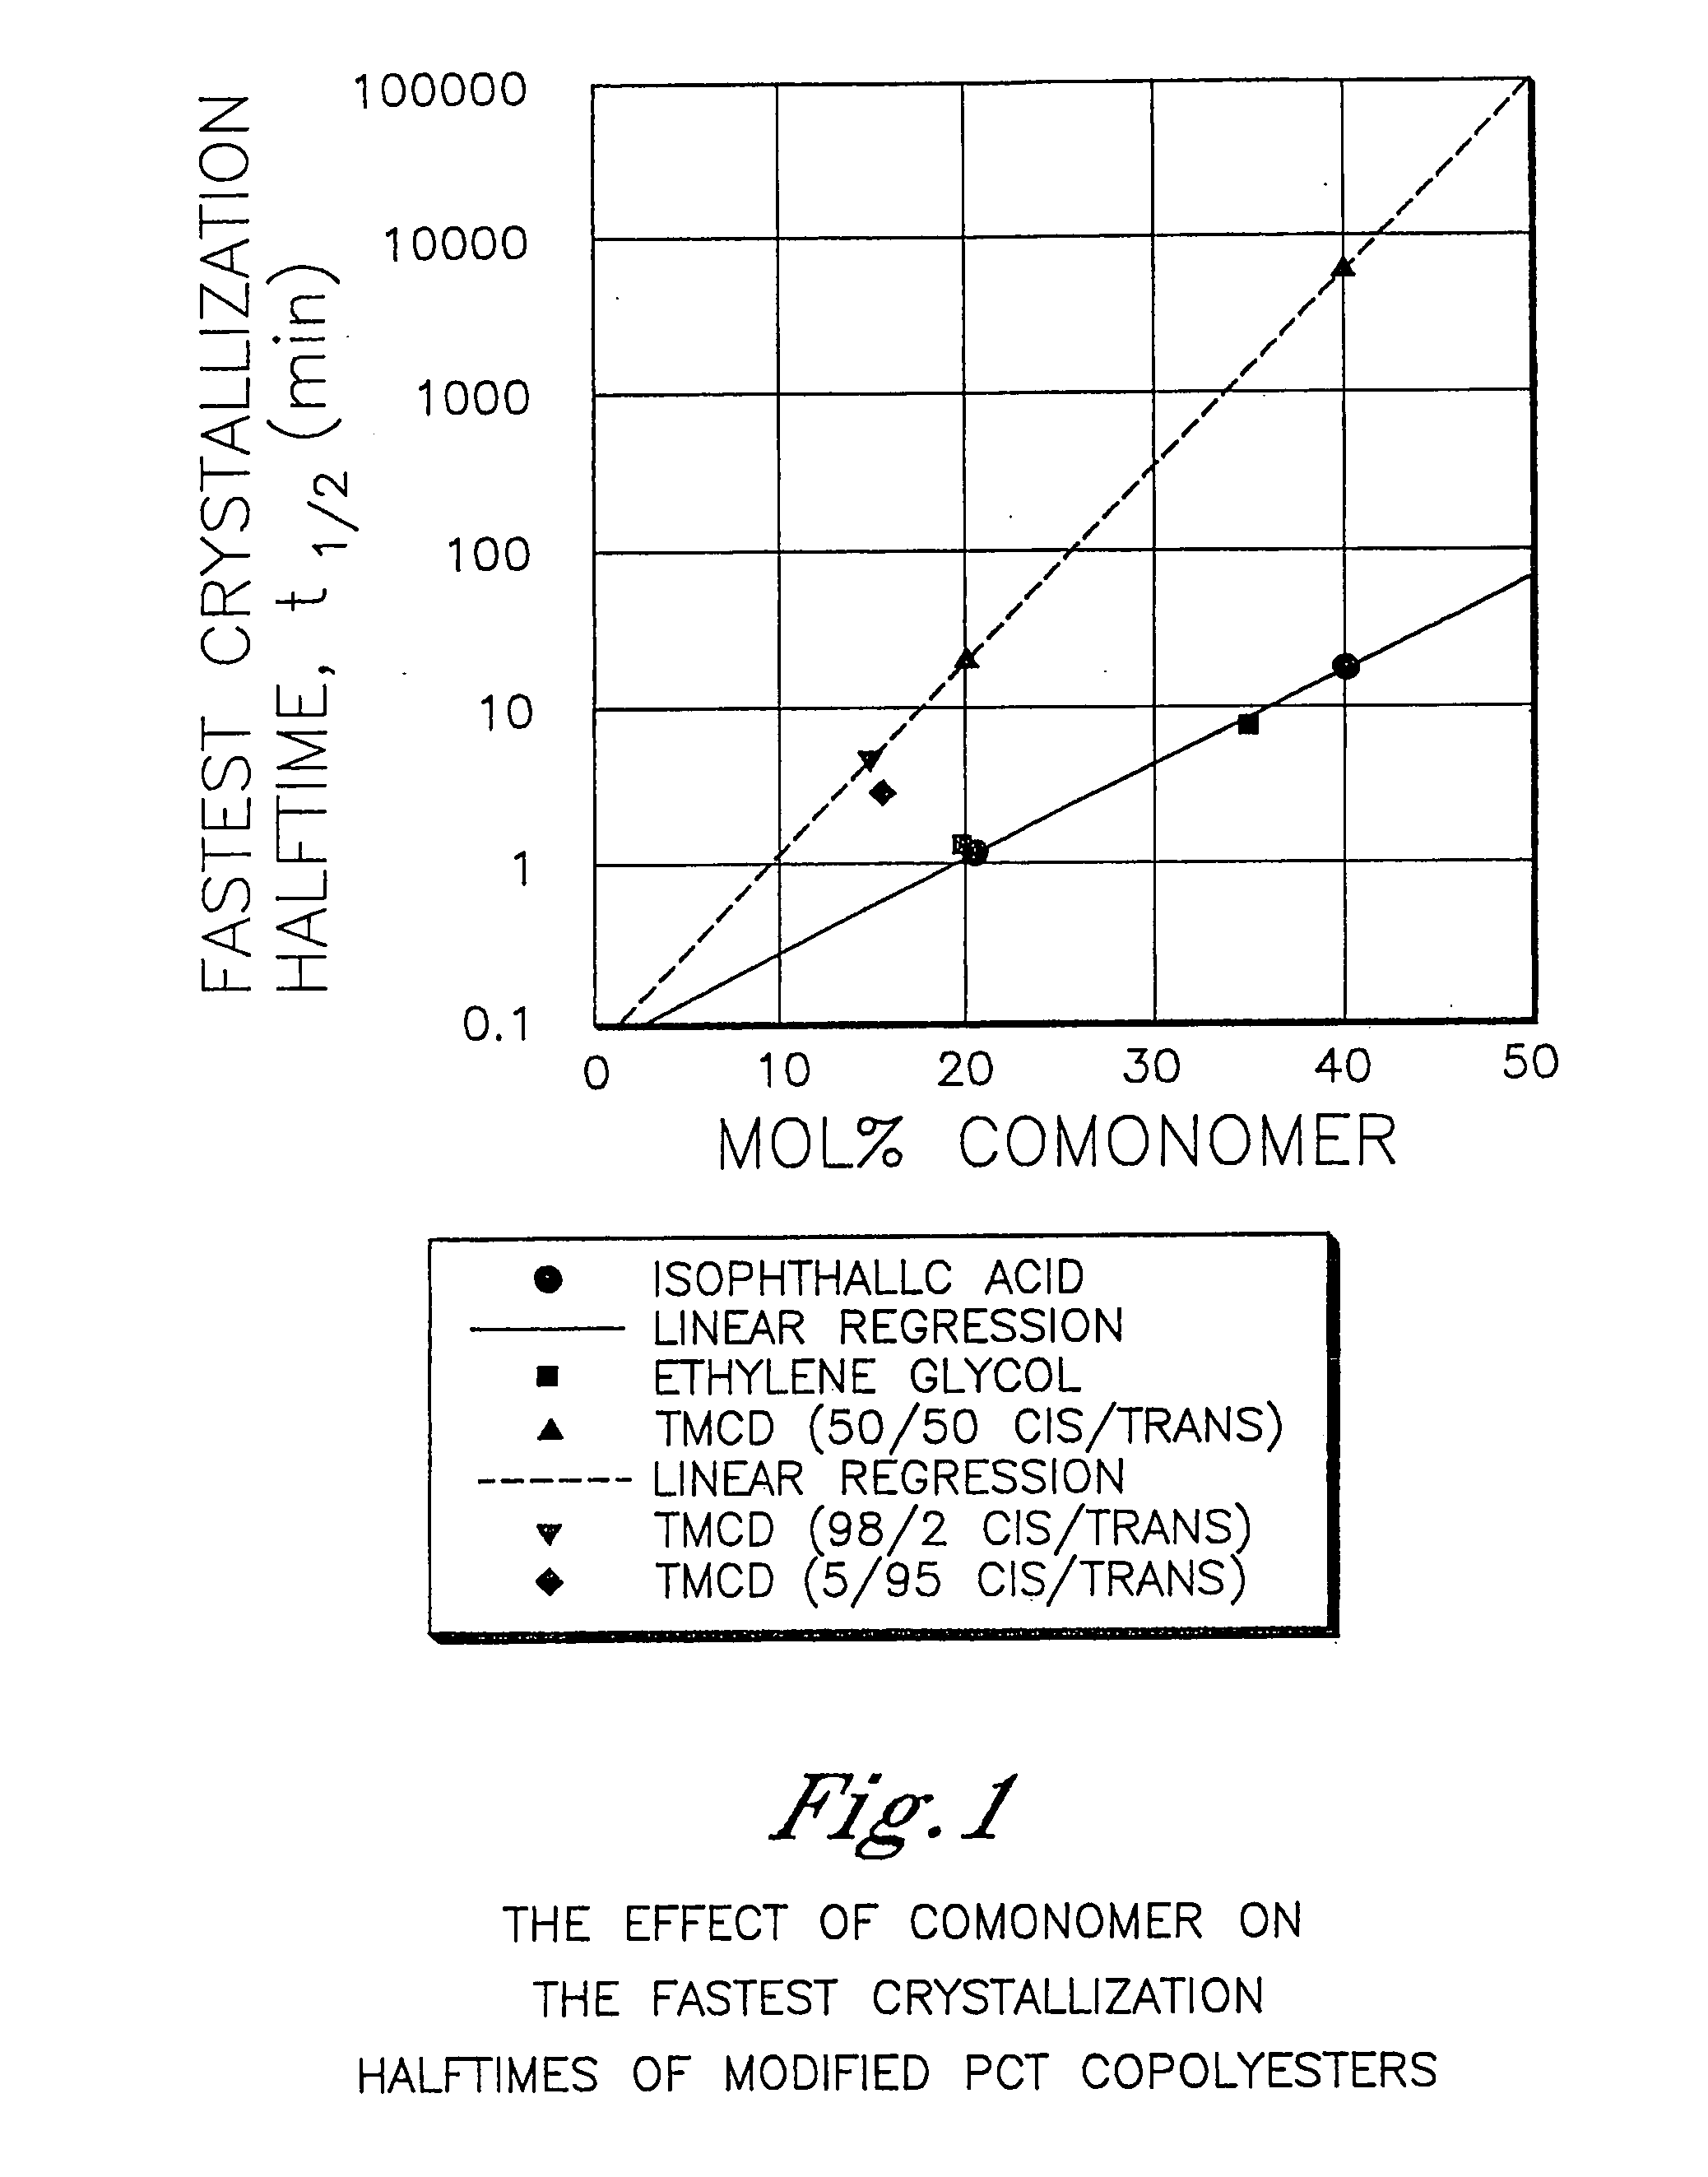 Sound barriers comprising polyester compositions formed from 2,2,4,4-tetramethyl-1,3-cyclobutanediol and 1,4-cyclohexanedimethanol